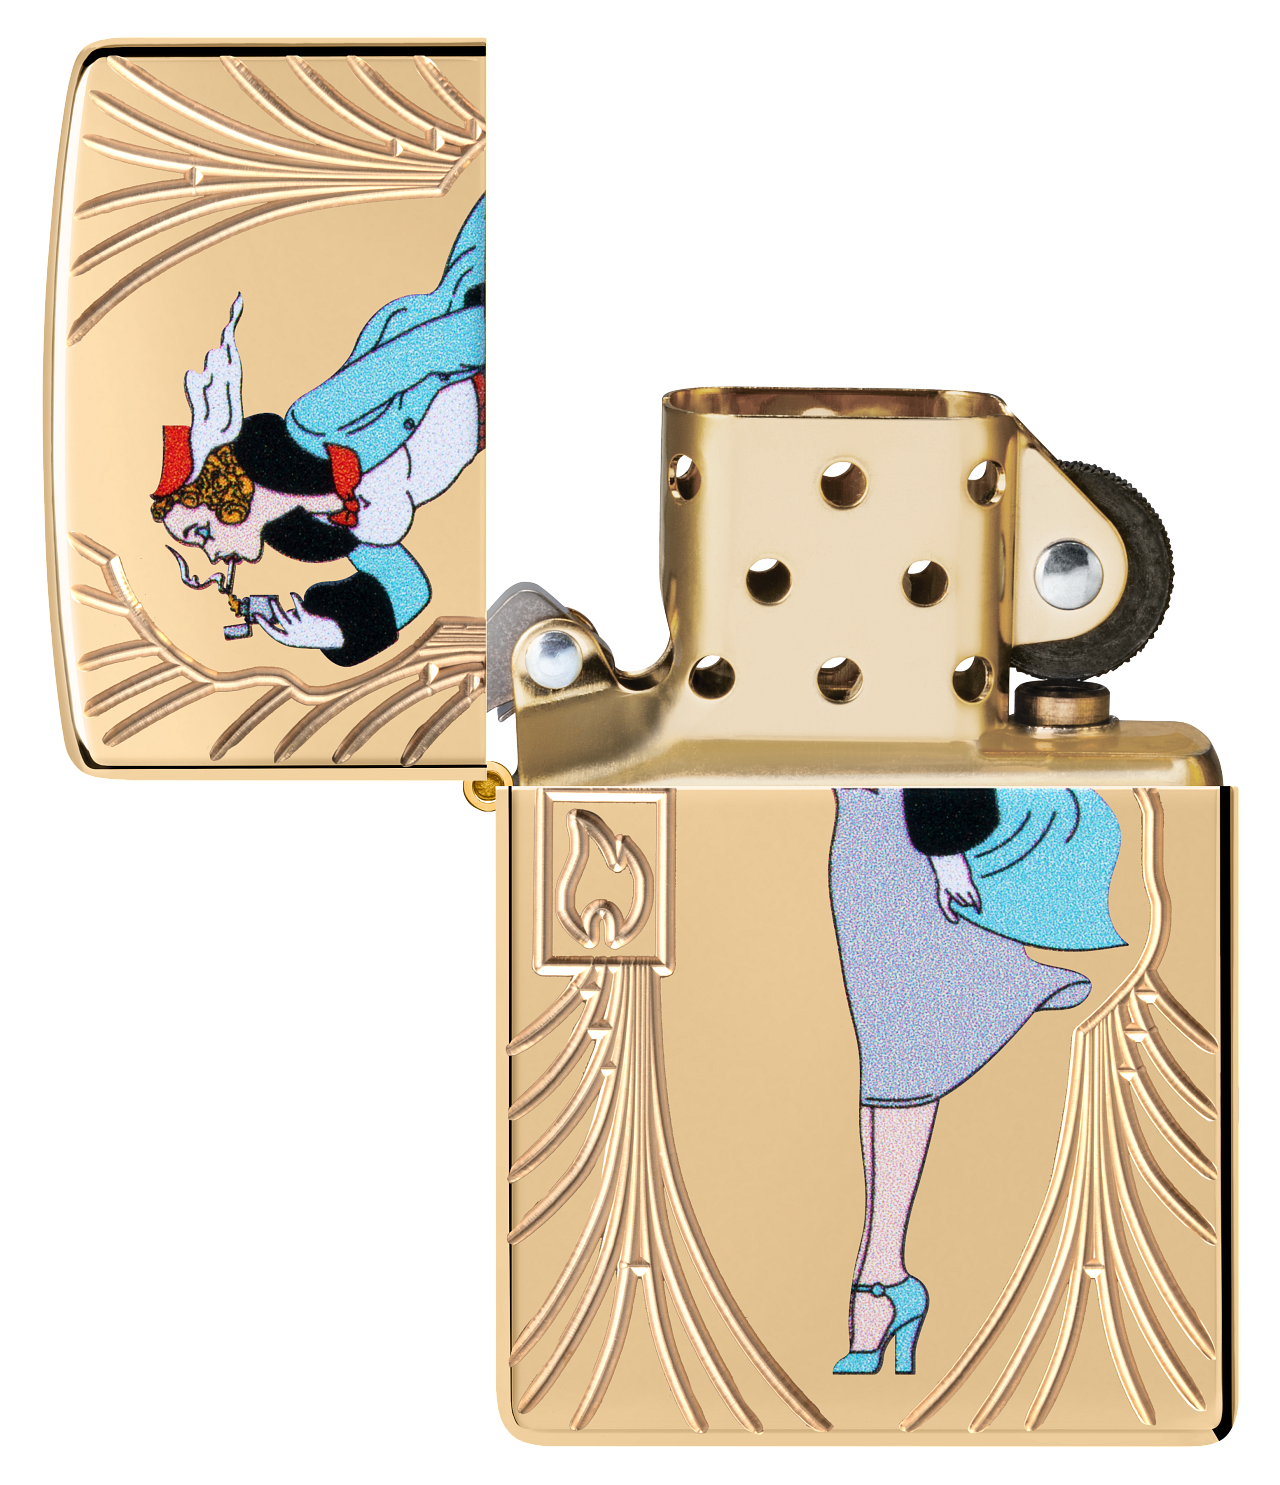 Zippo Windy Girl 85th Anniversary Collectible Armor Lighter #48413